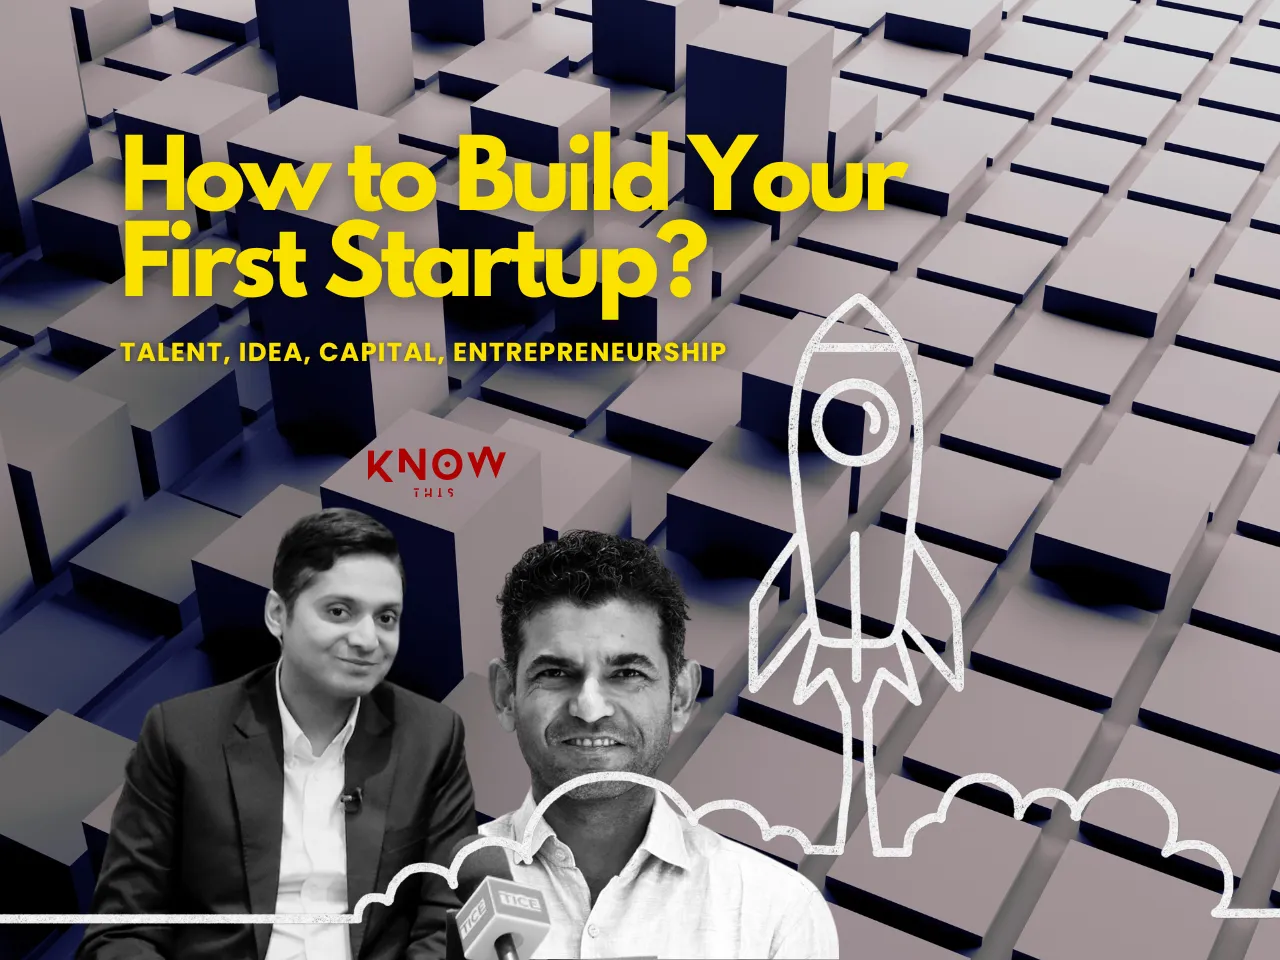 How to Build Your First Startup